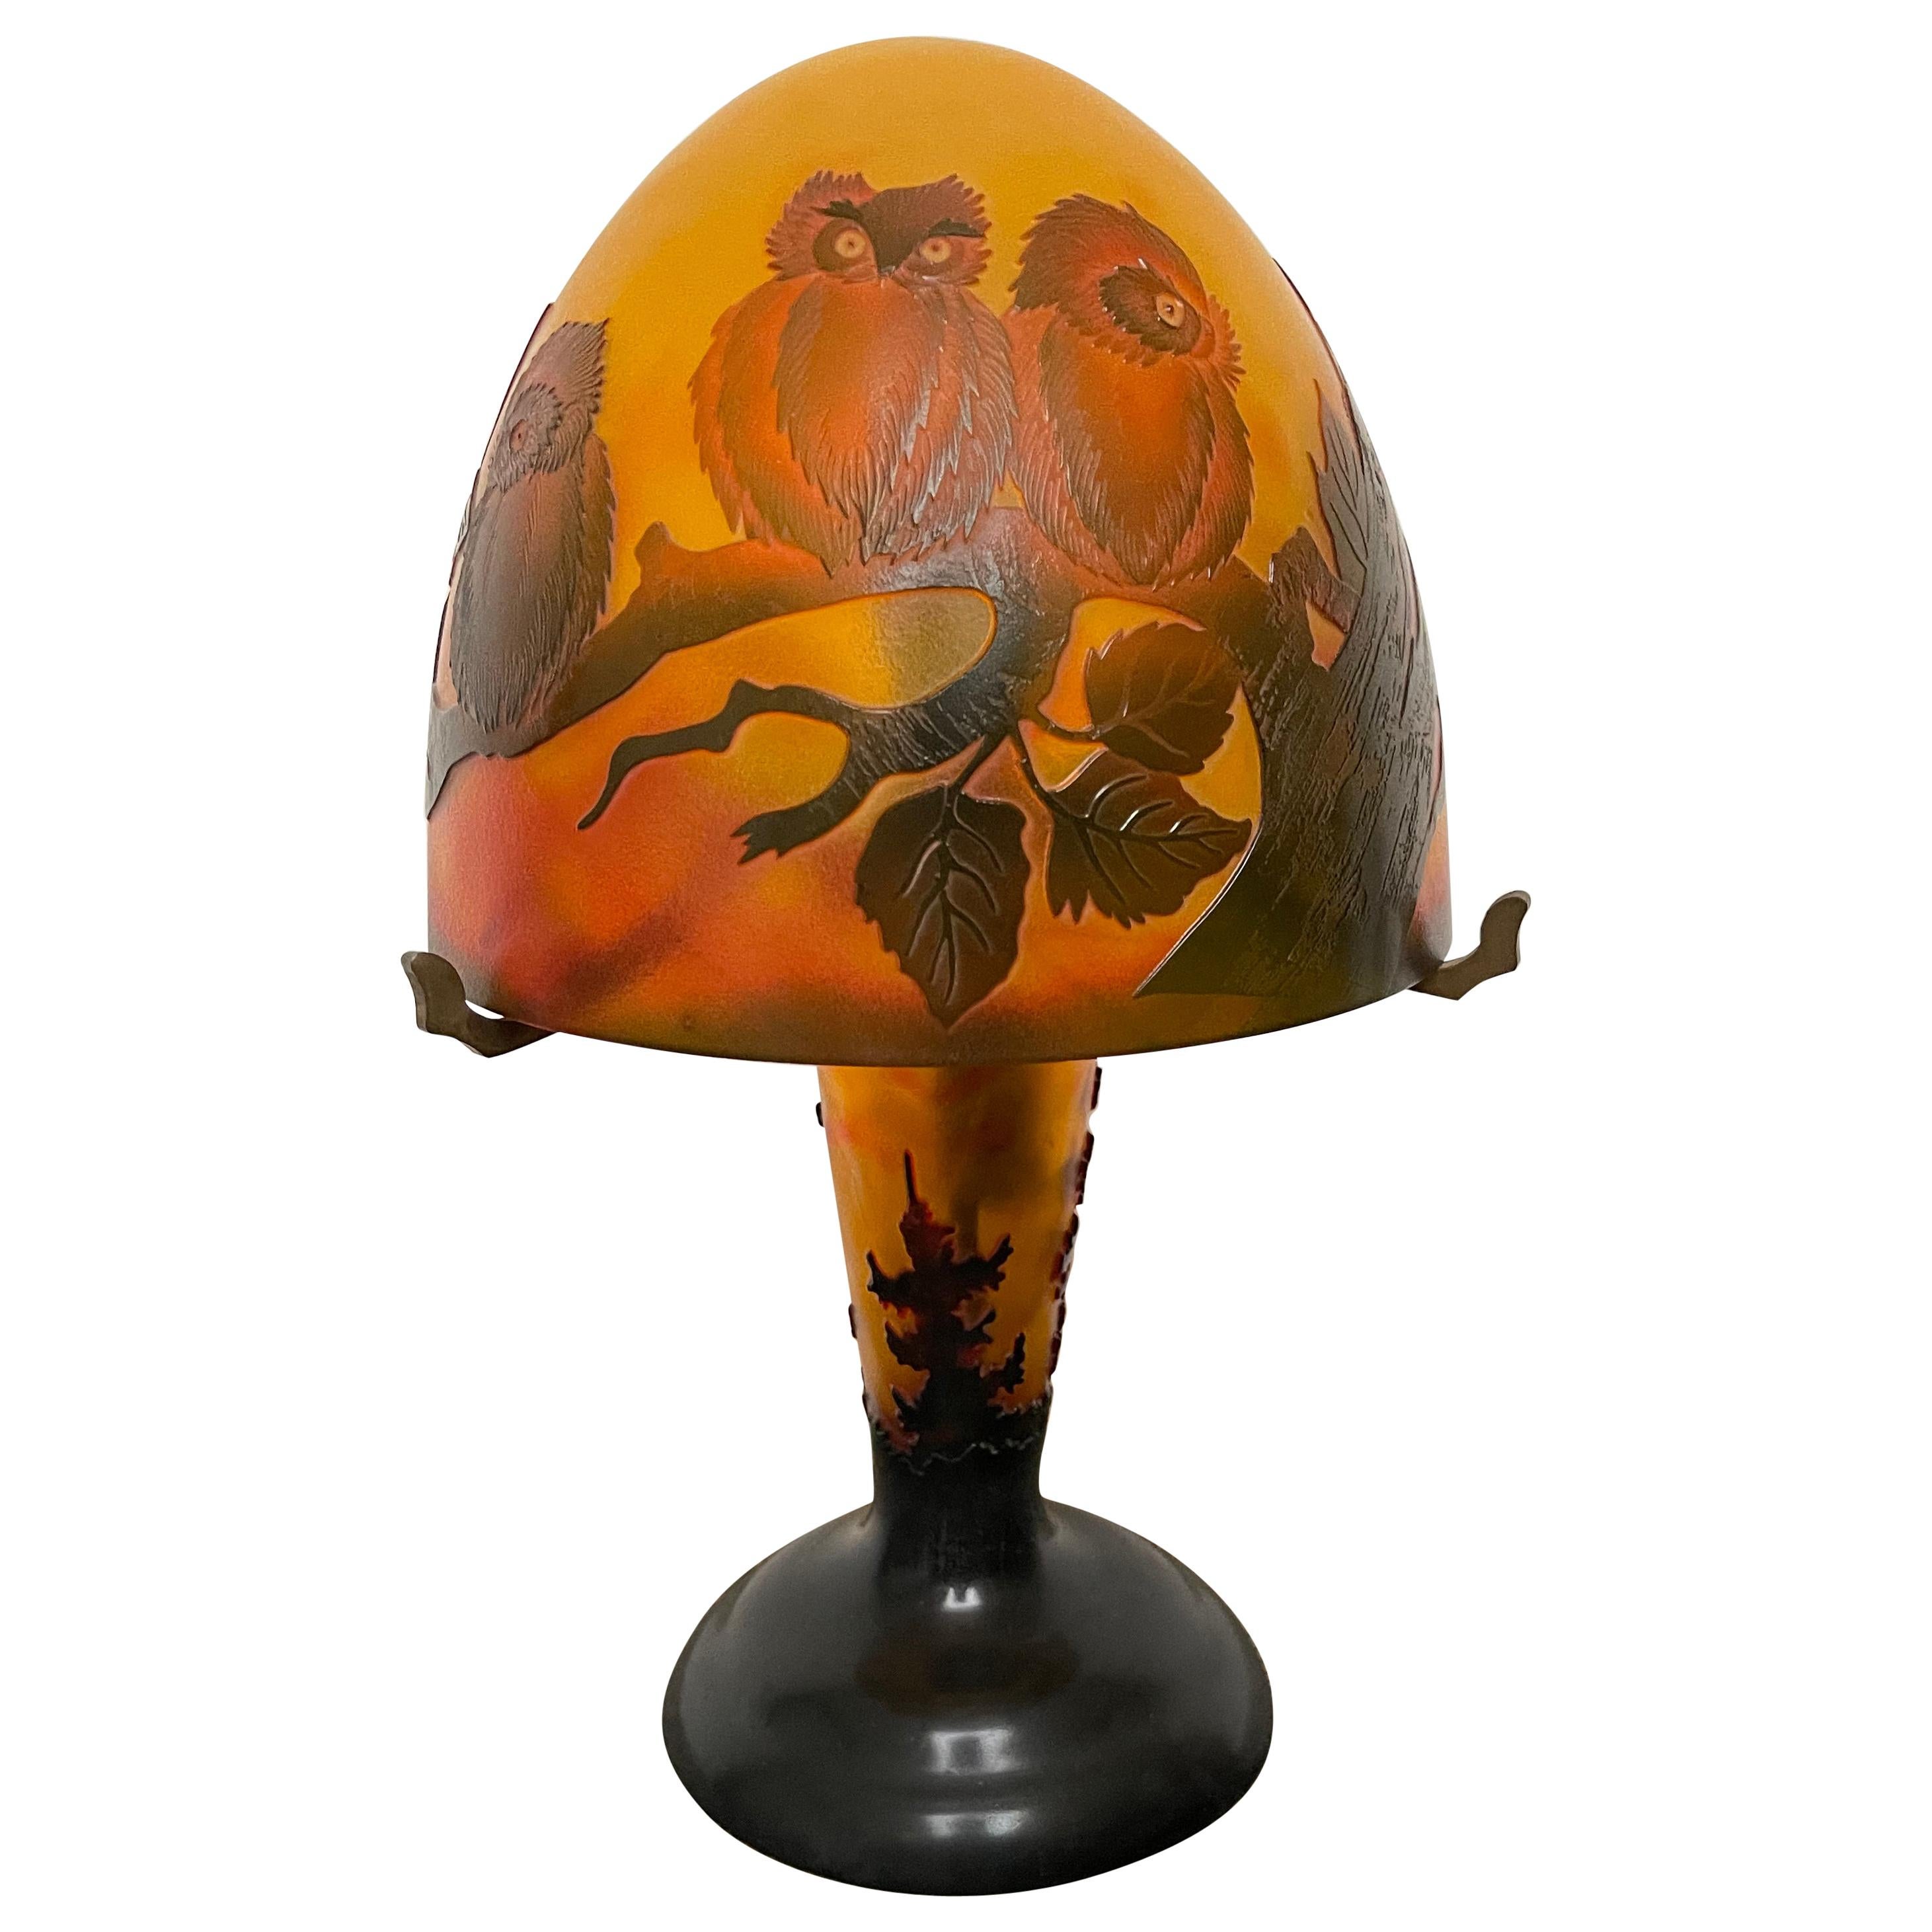 Art Deco Style Cameo Glass Table or Desk Lamp with A Family of Owl Sculptures